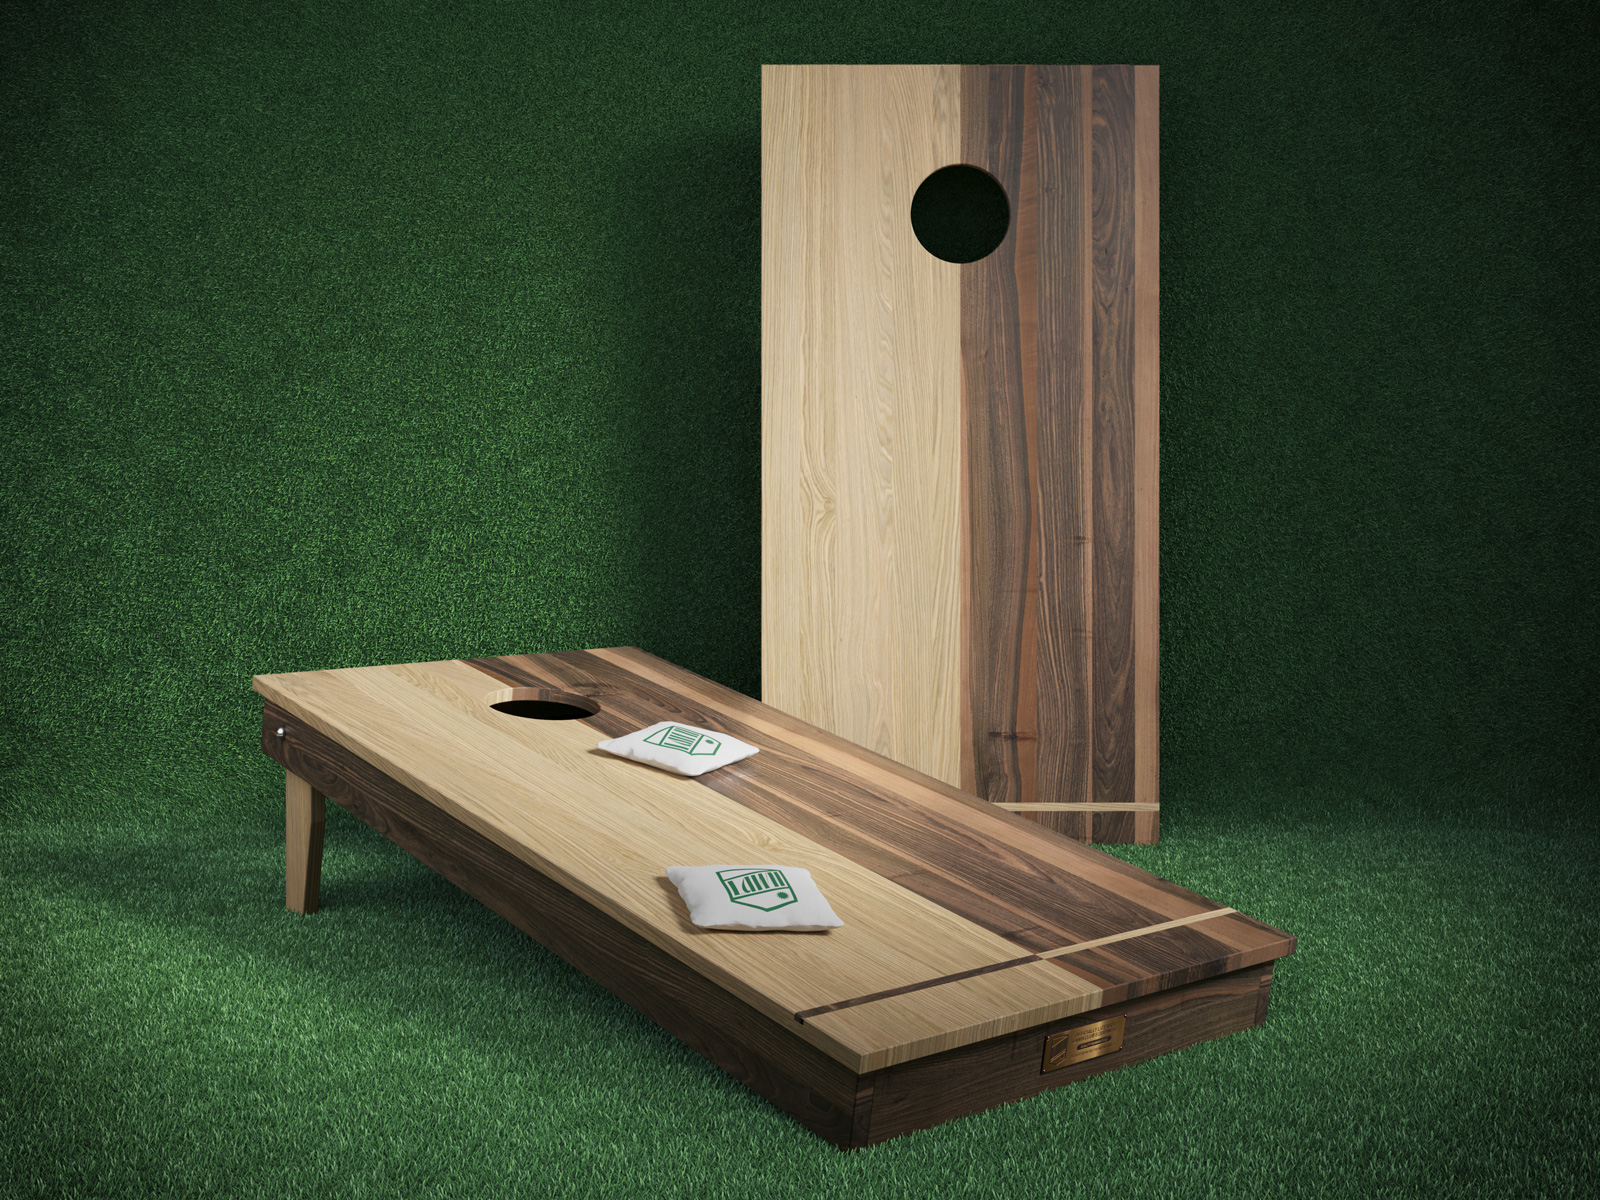 A set of gaming of equipment for the game cornhole, made of rich dark and light wood, set against a green turf background.